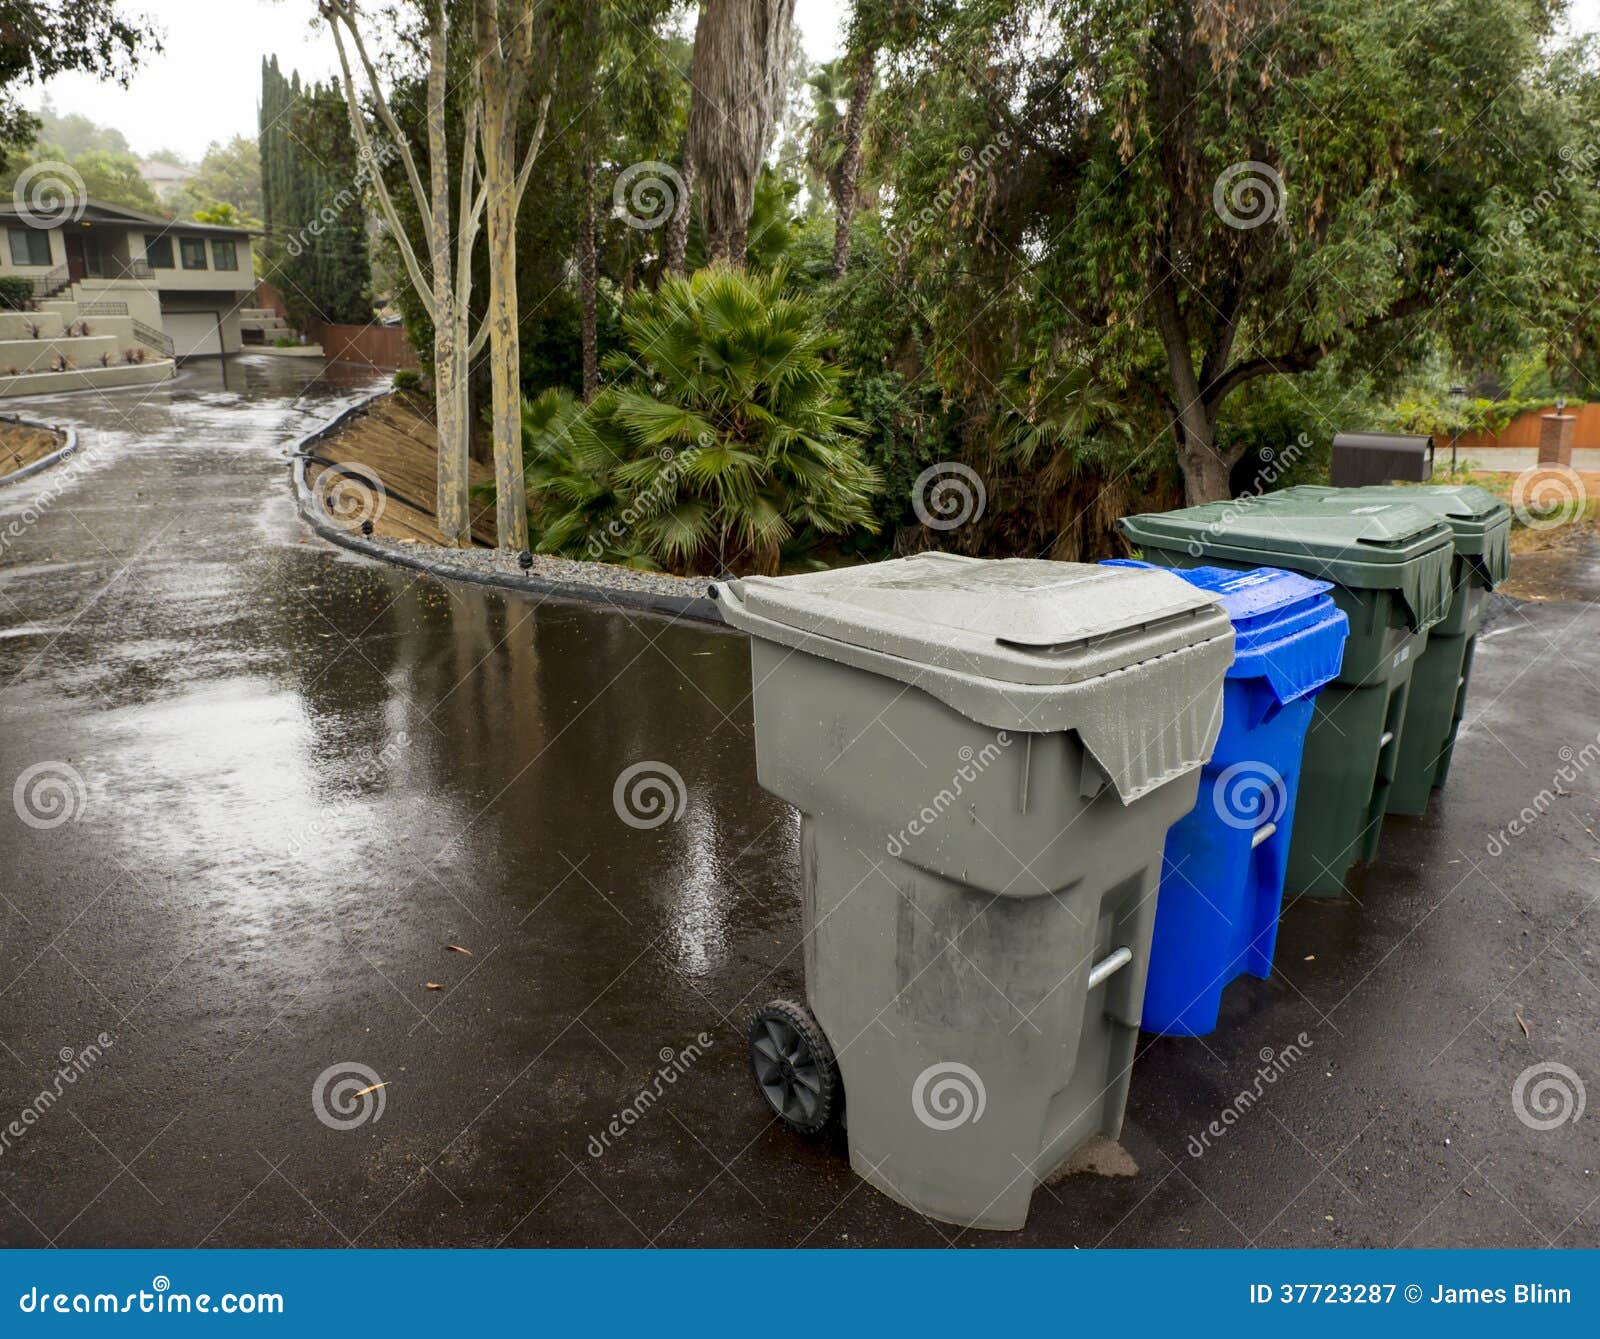 Trash Recycling And Green Leaf Bins On The Street Stock Image